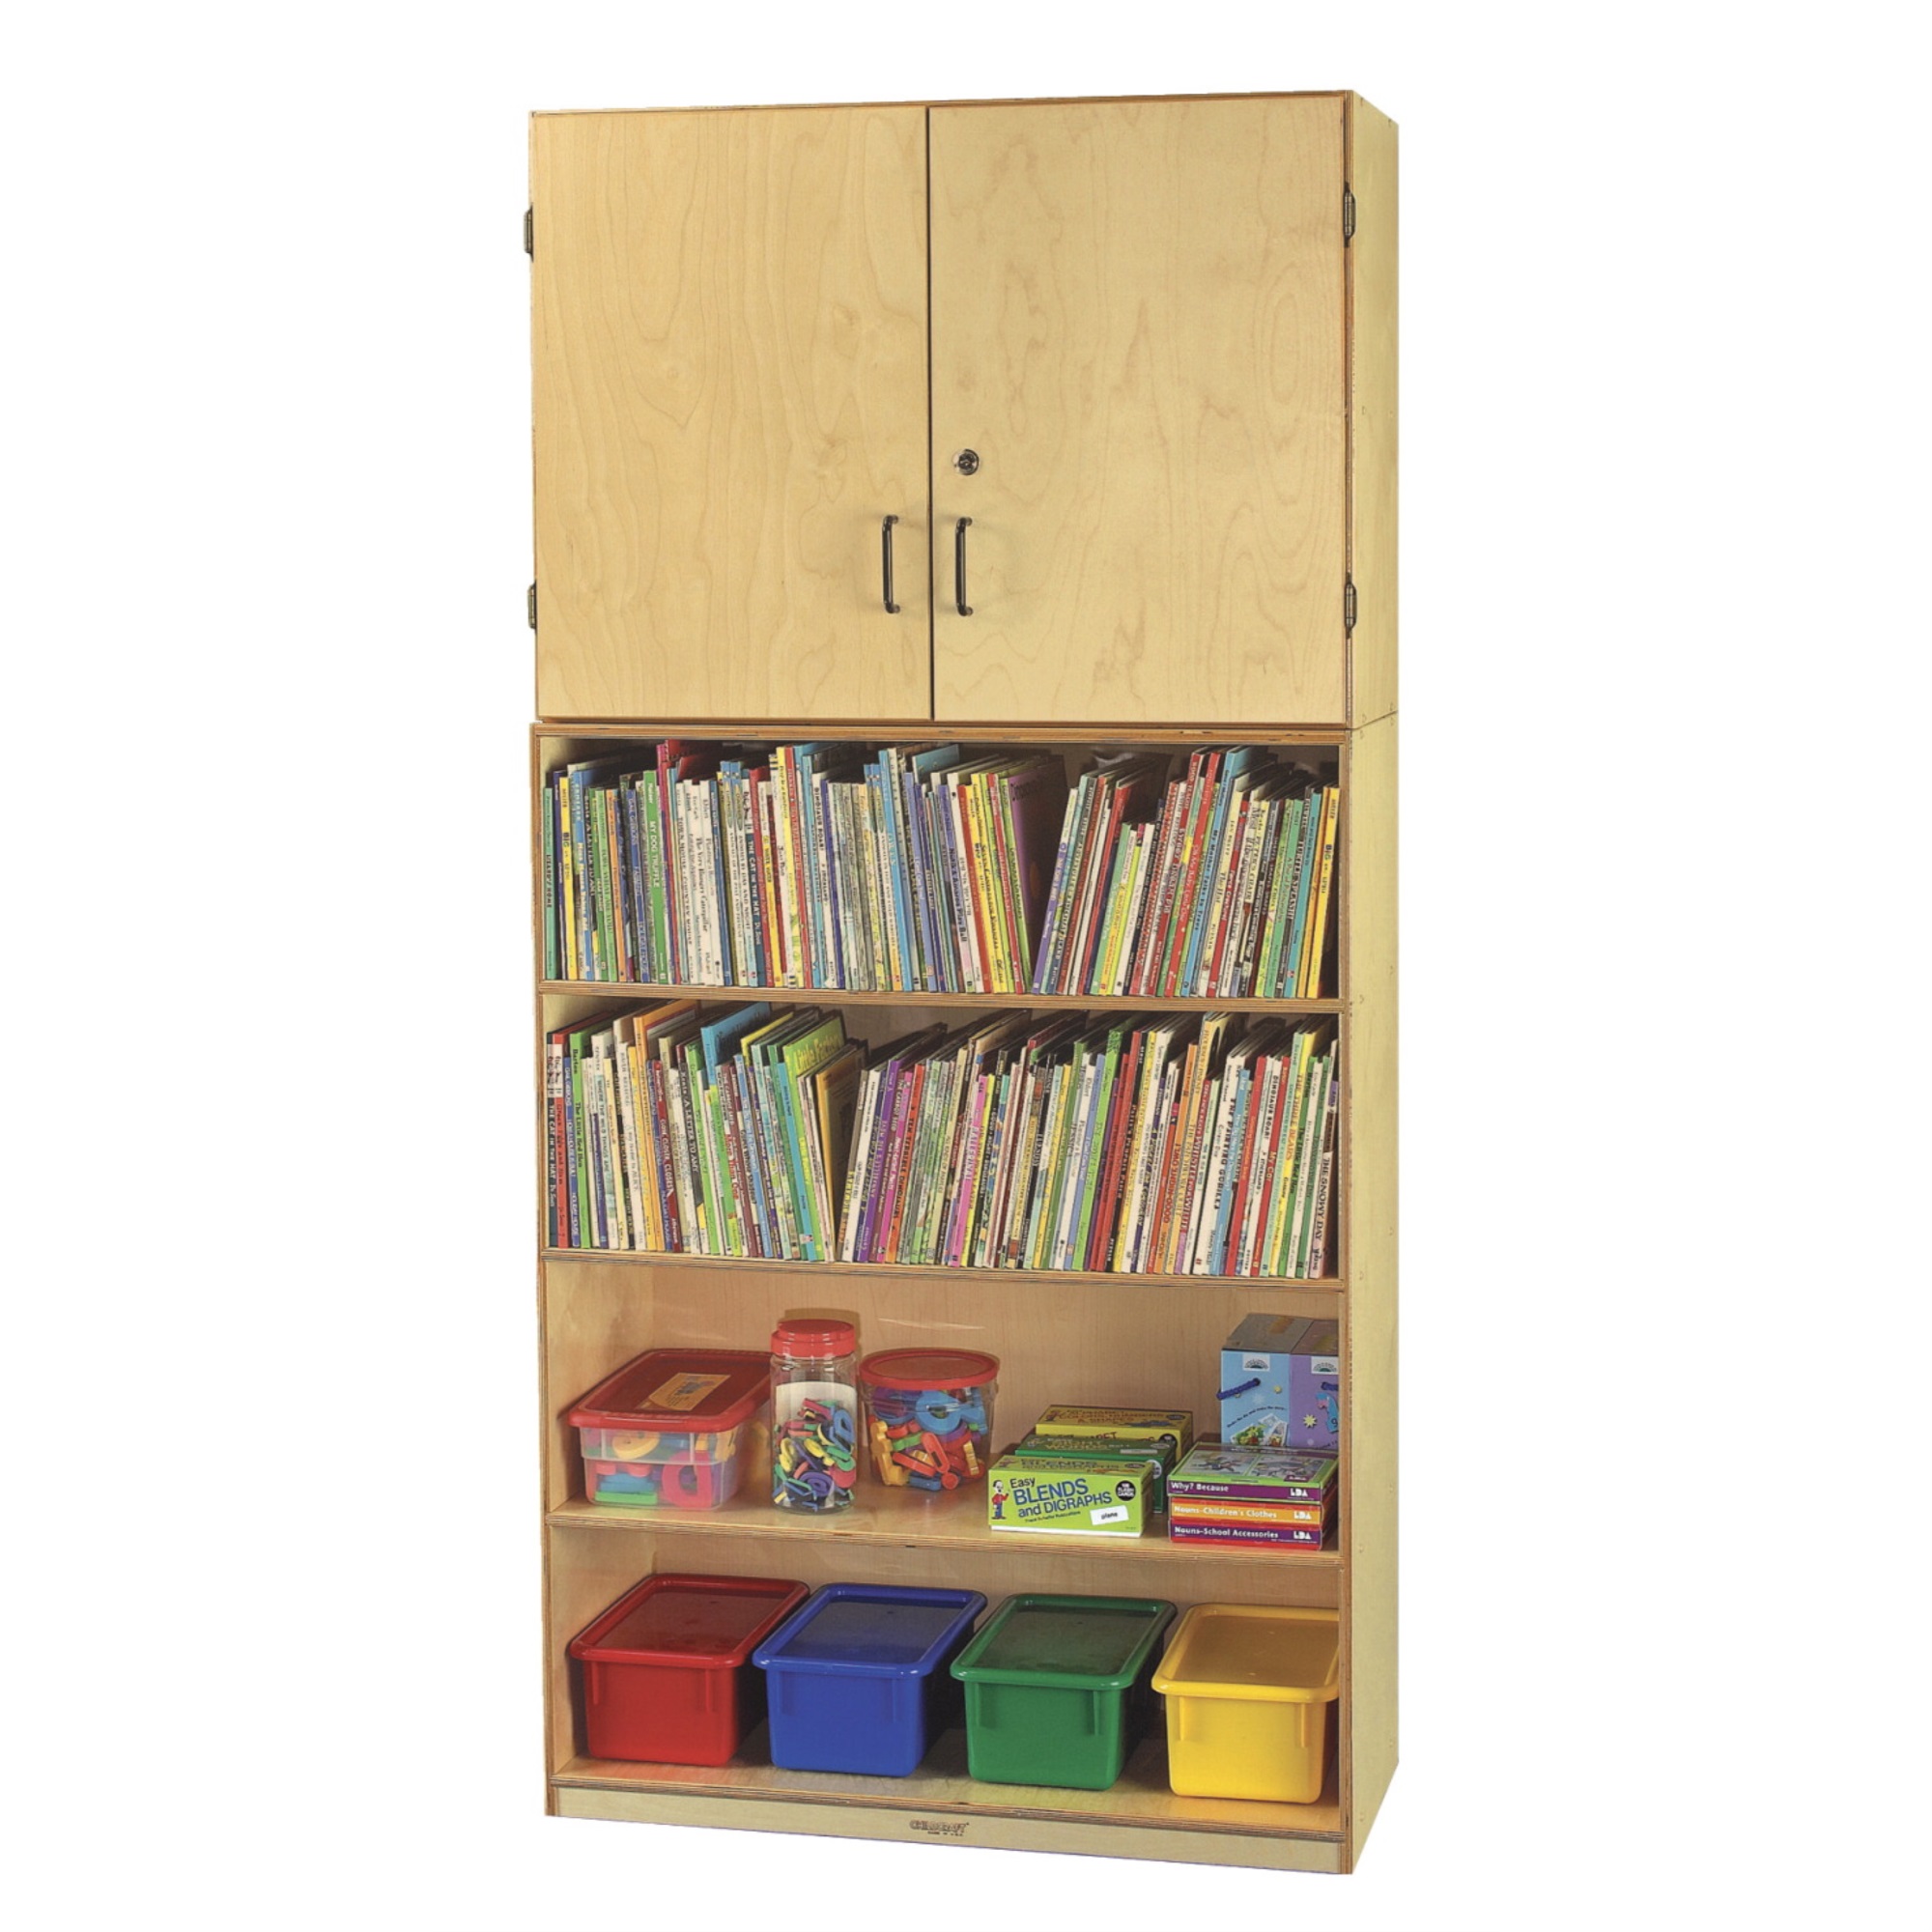 Childcraft Vertical Storage Unit with Shelf Base, 35-3/4 x 14-3/4 x 74-1/4 Inches